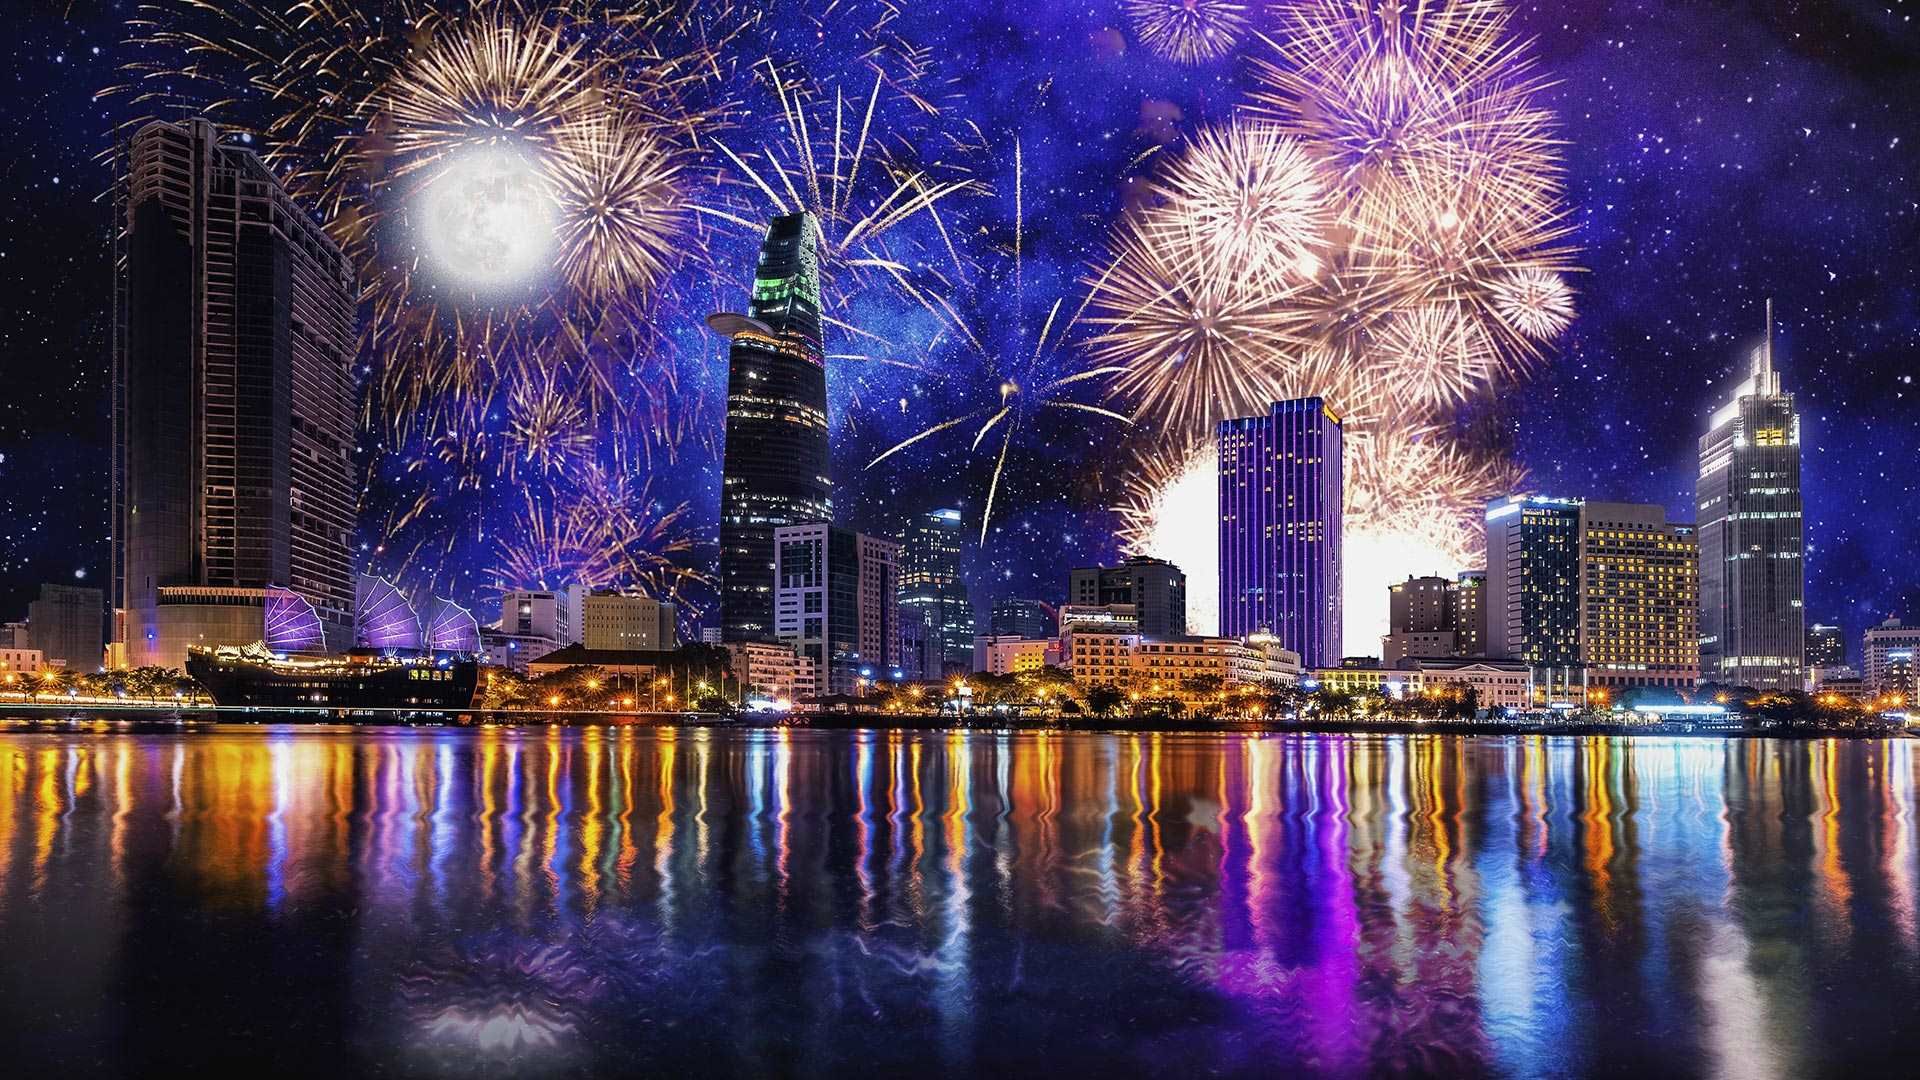 Tet Holiday Traditions: Exploring the Significance of Fireworks in Vietnamese Culture